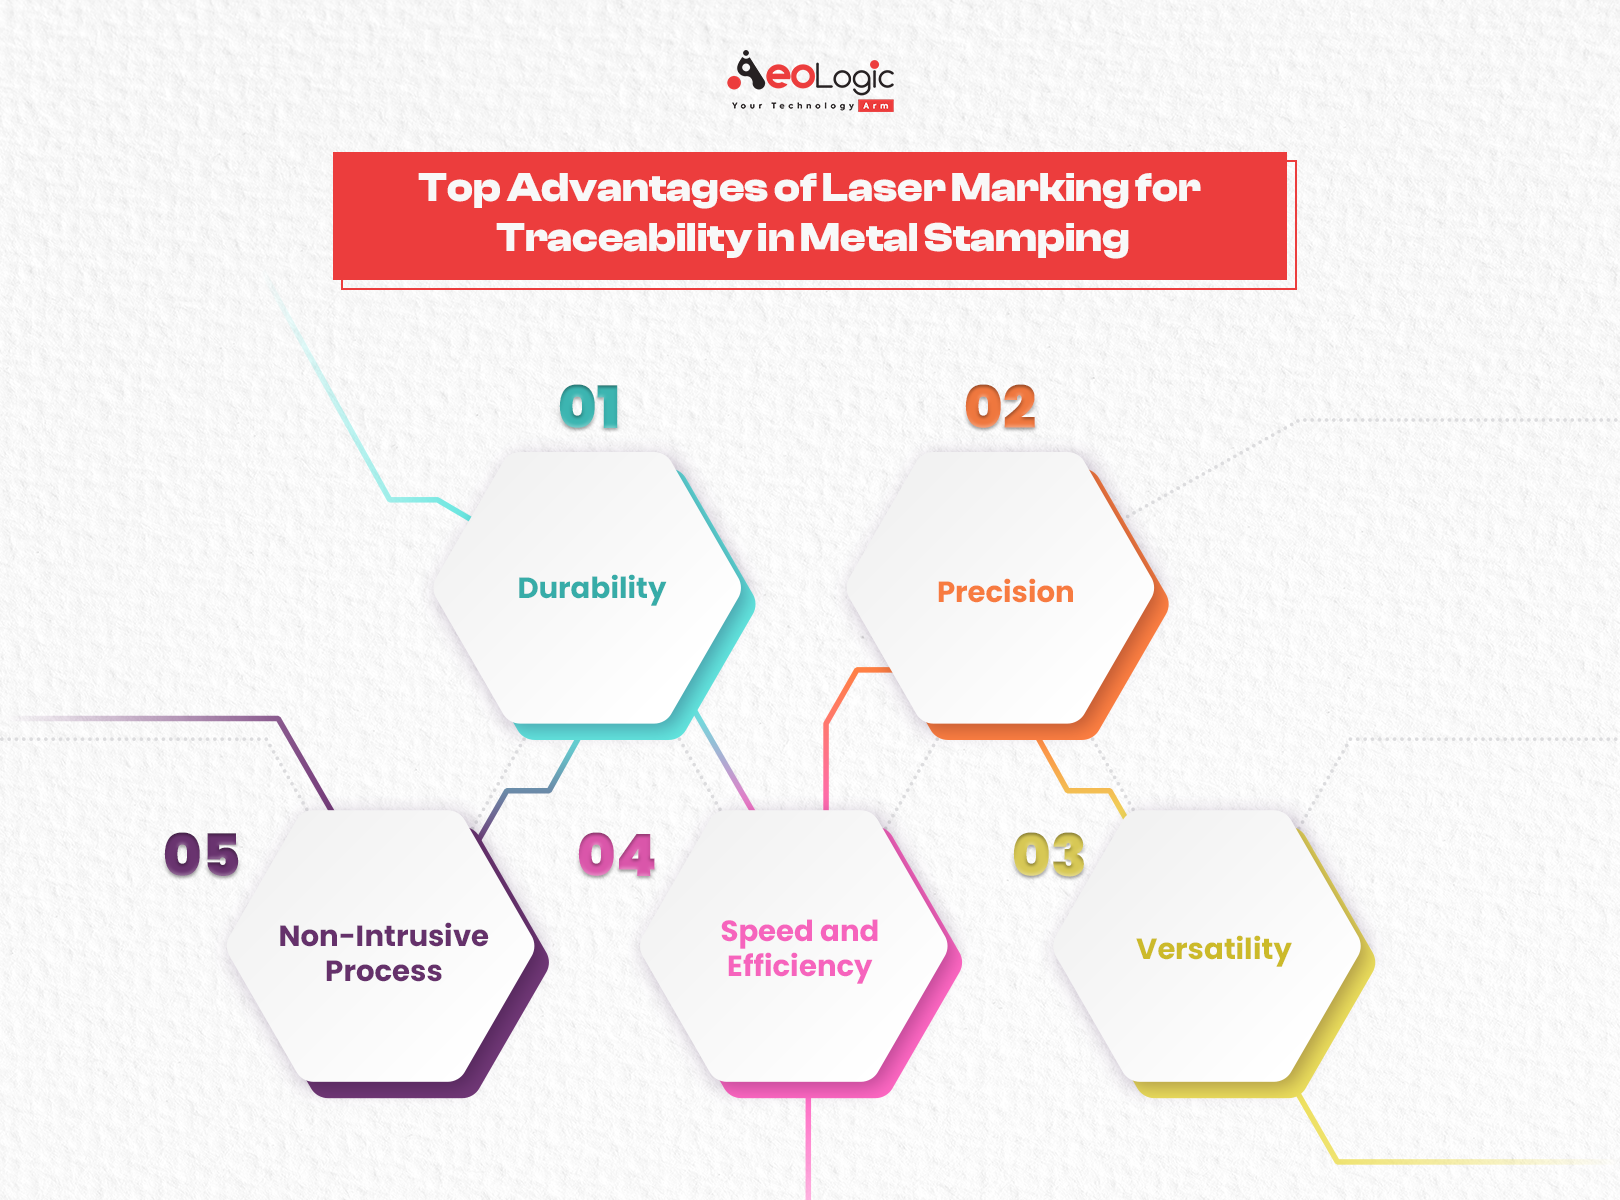 Top Advantages of Laser Marking for Traceability in Metal Stamping